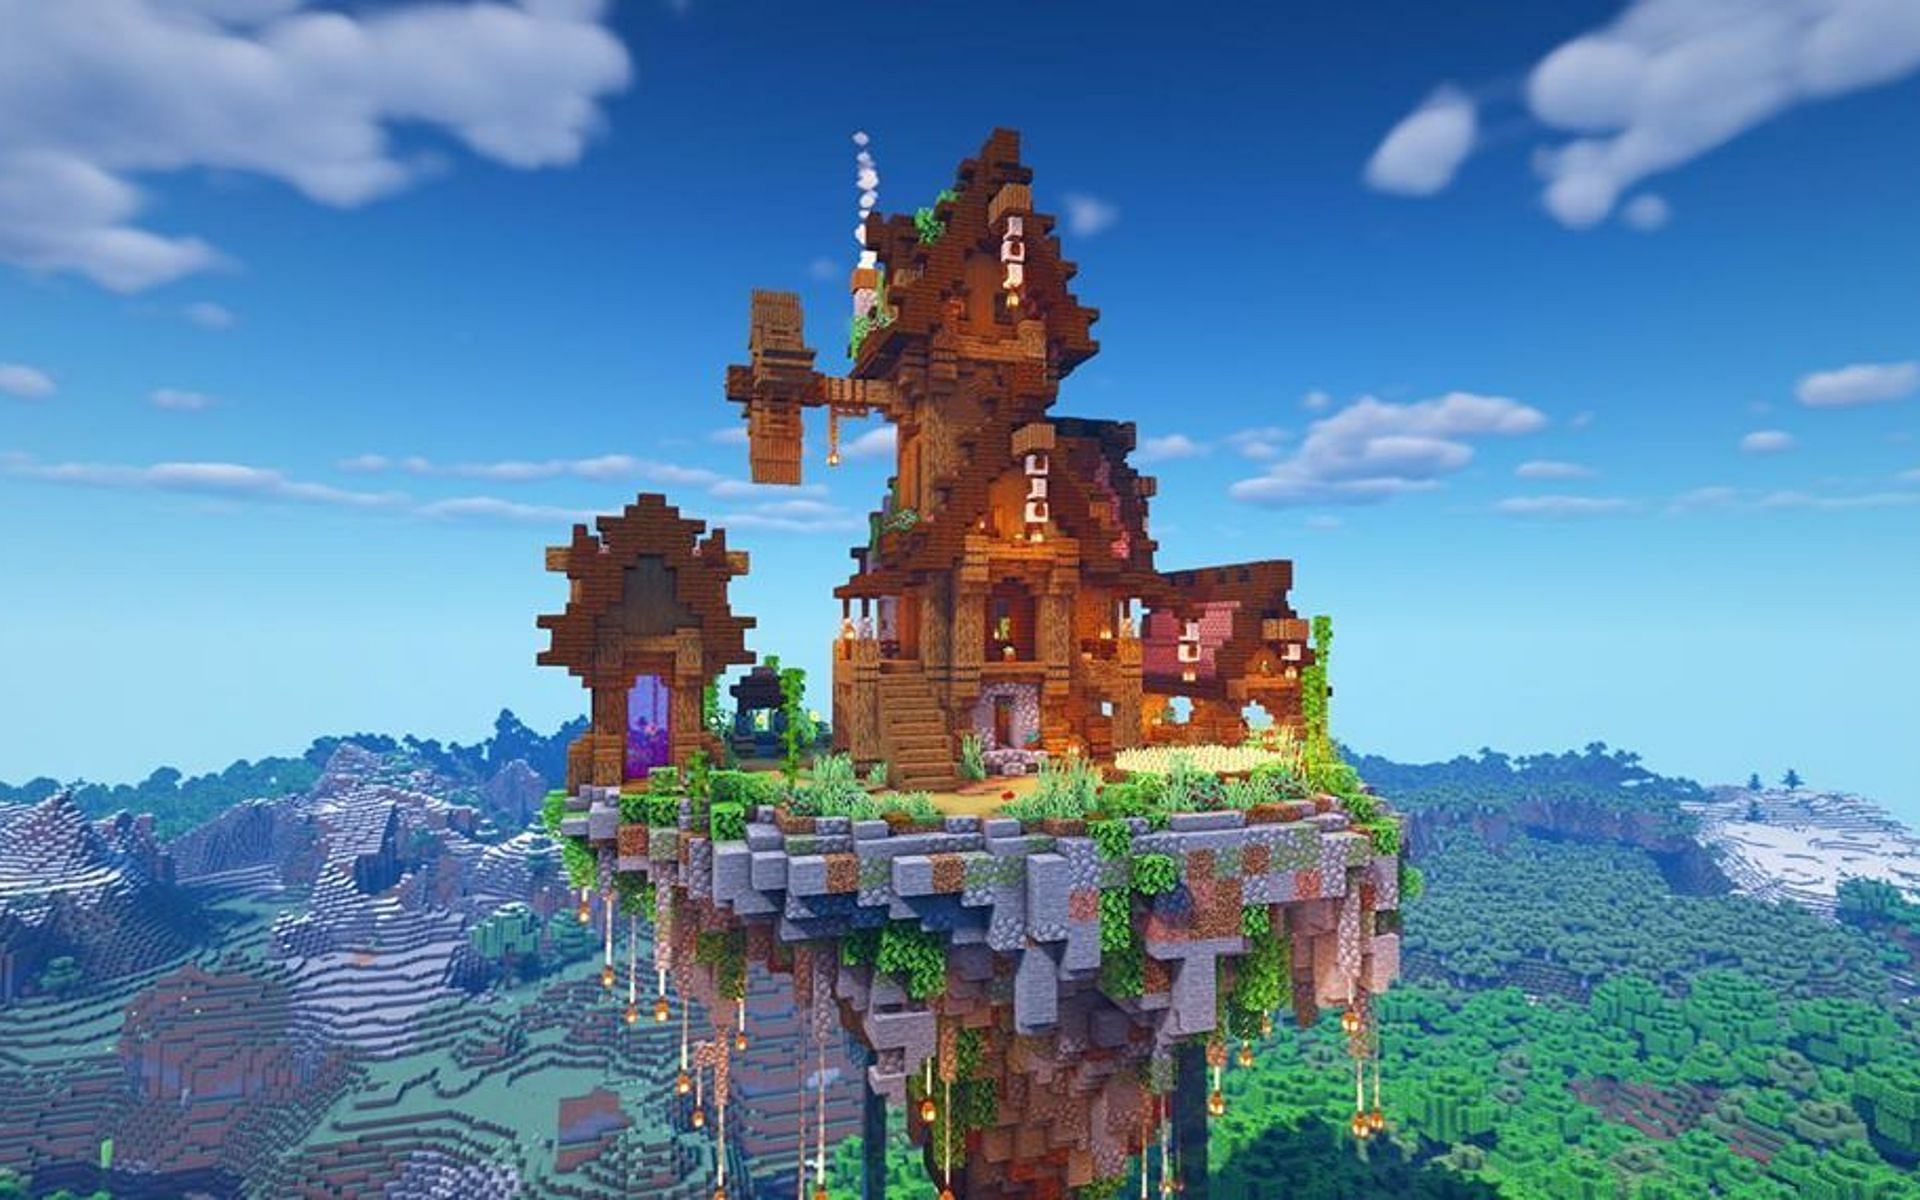 An image of a floating island base in Minecraft. Image via MythicalSausage